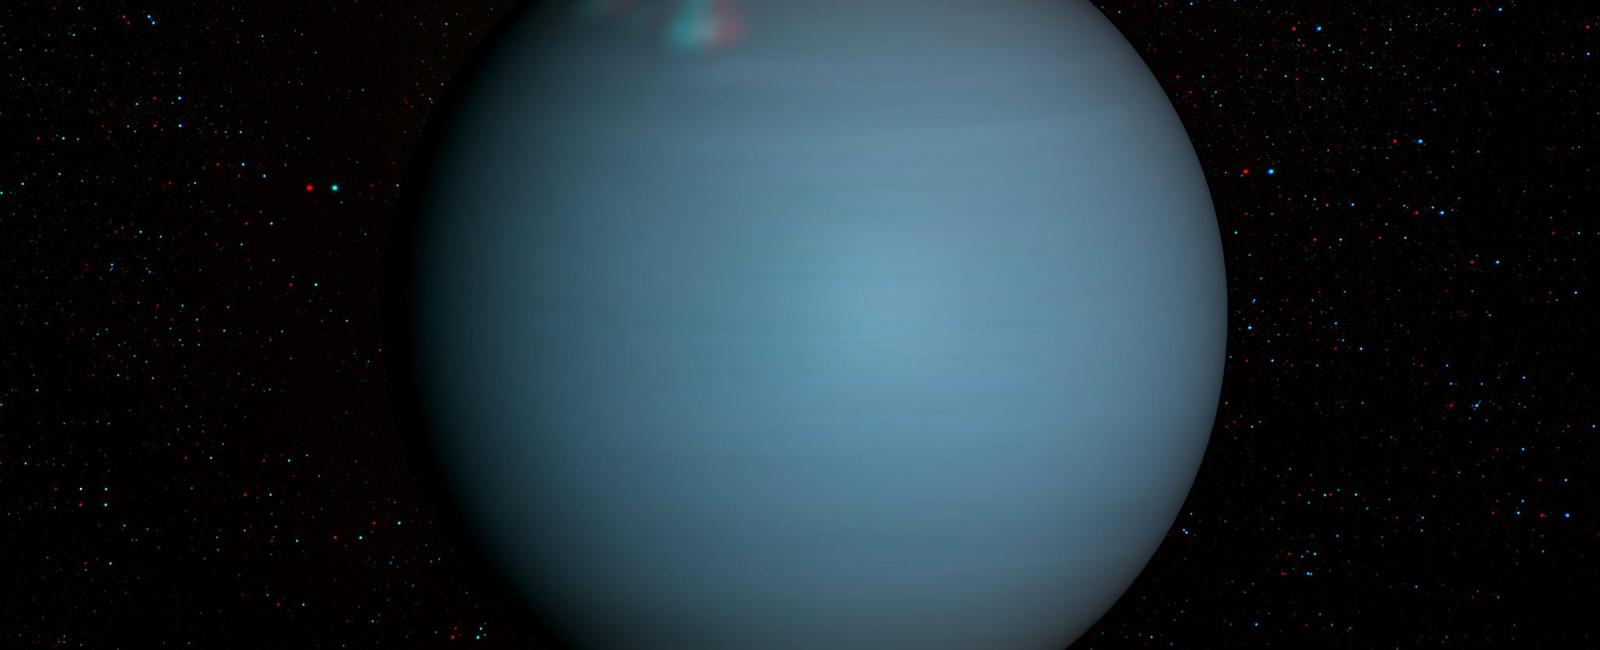 Uranus is blue due to high concentrations of methane in its atmosphere which absorbs the sun s red light and reflects blue light back into space